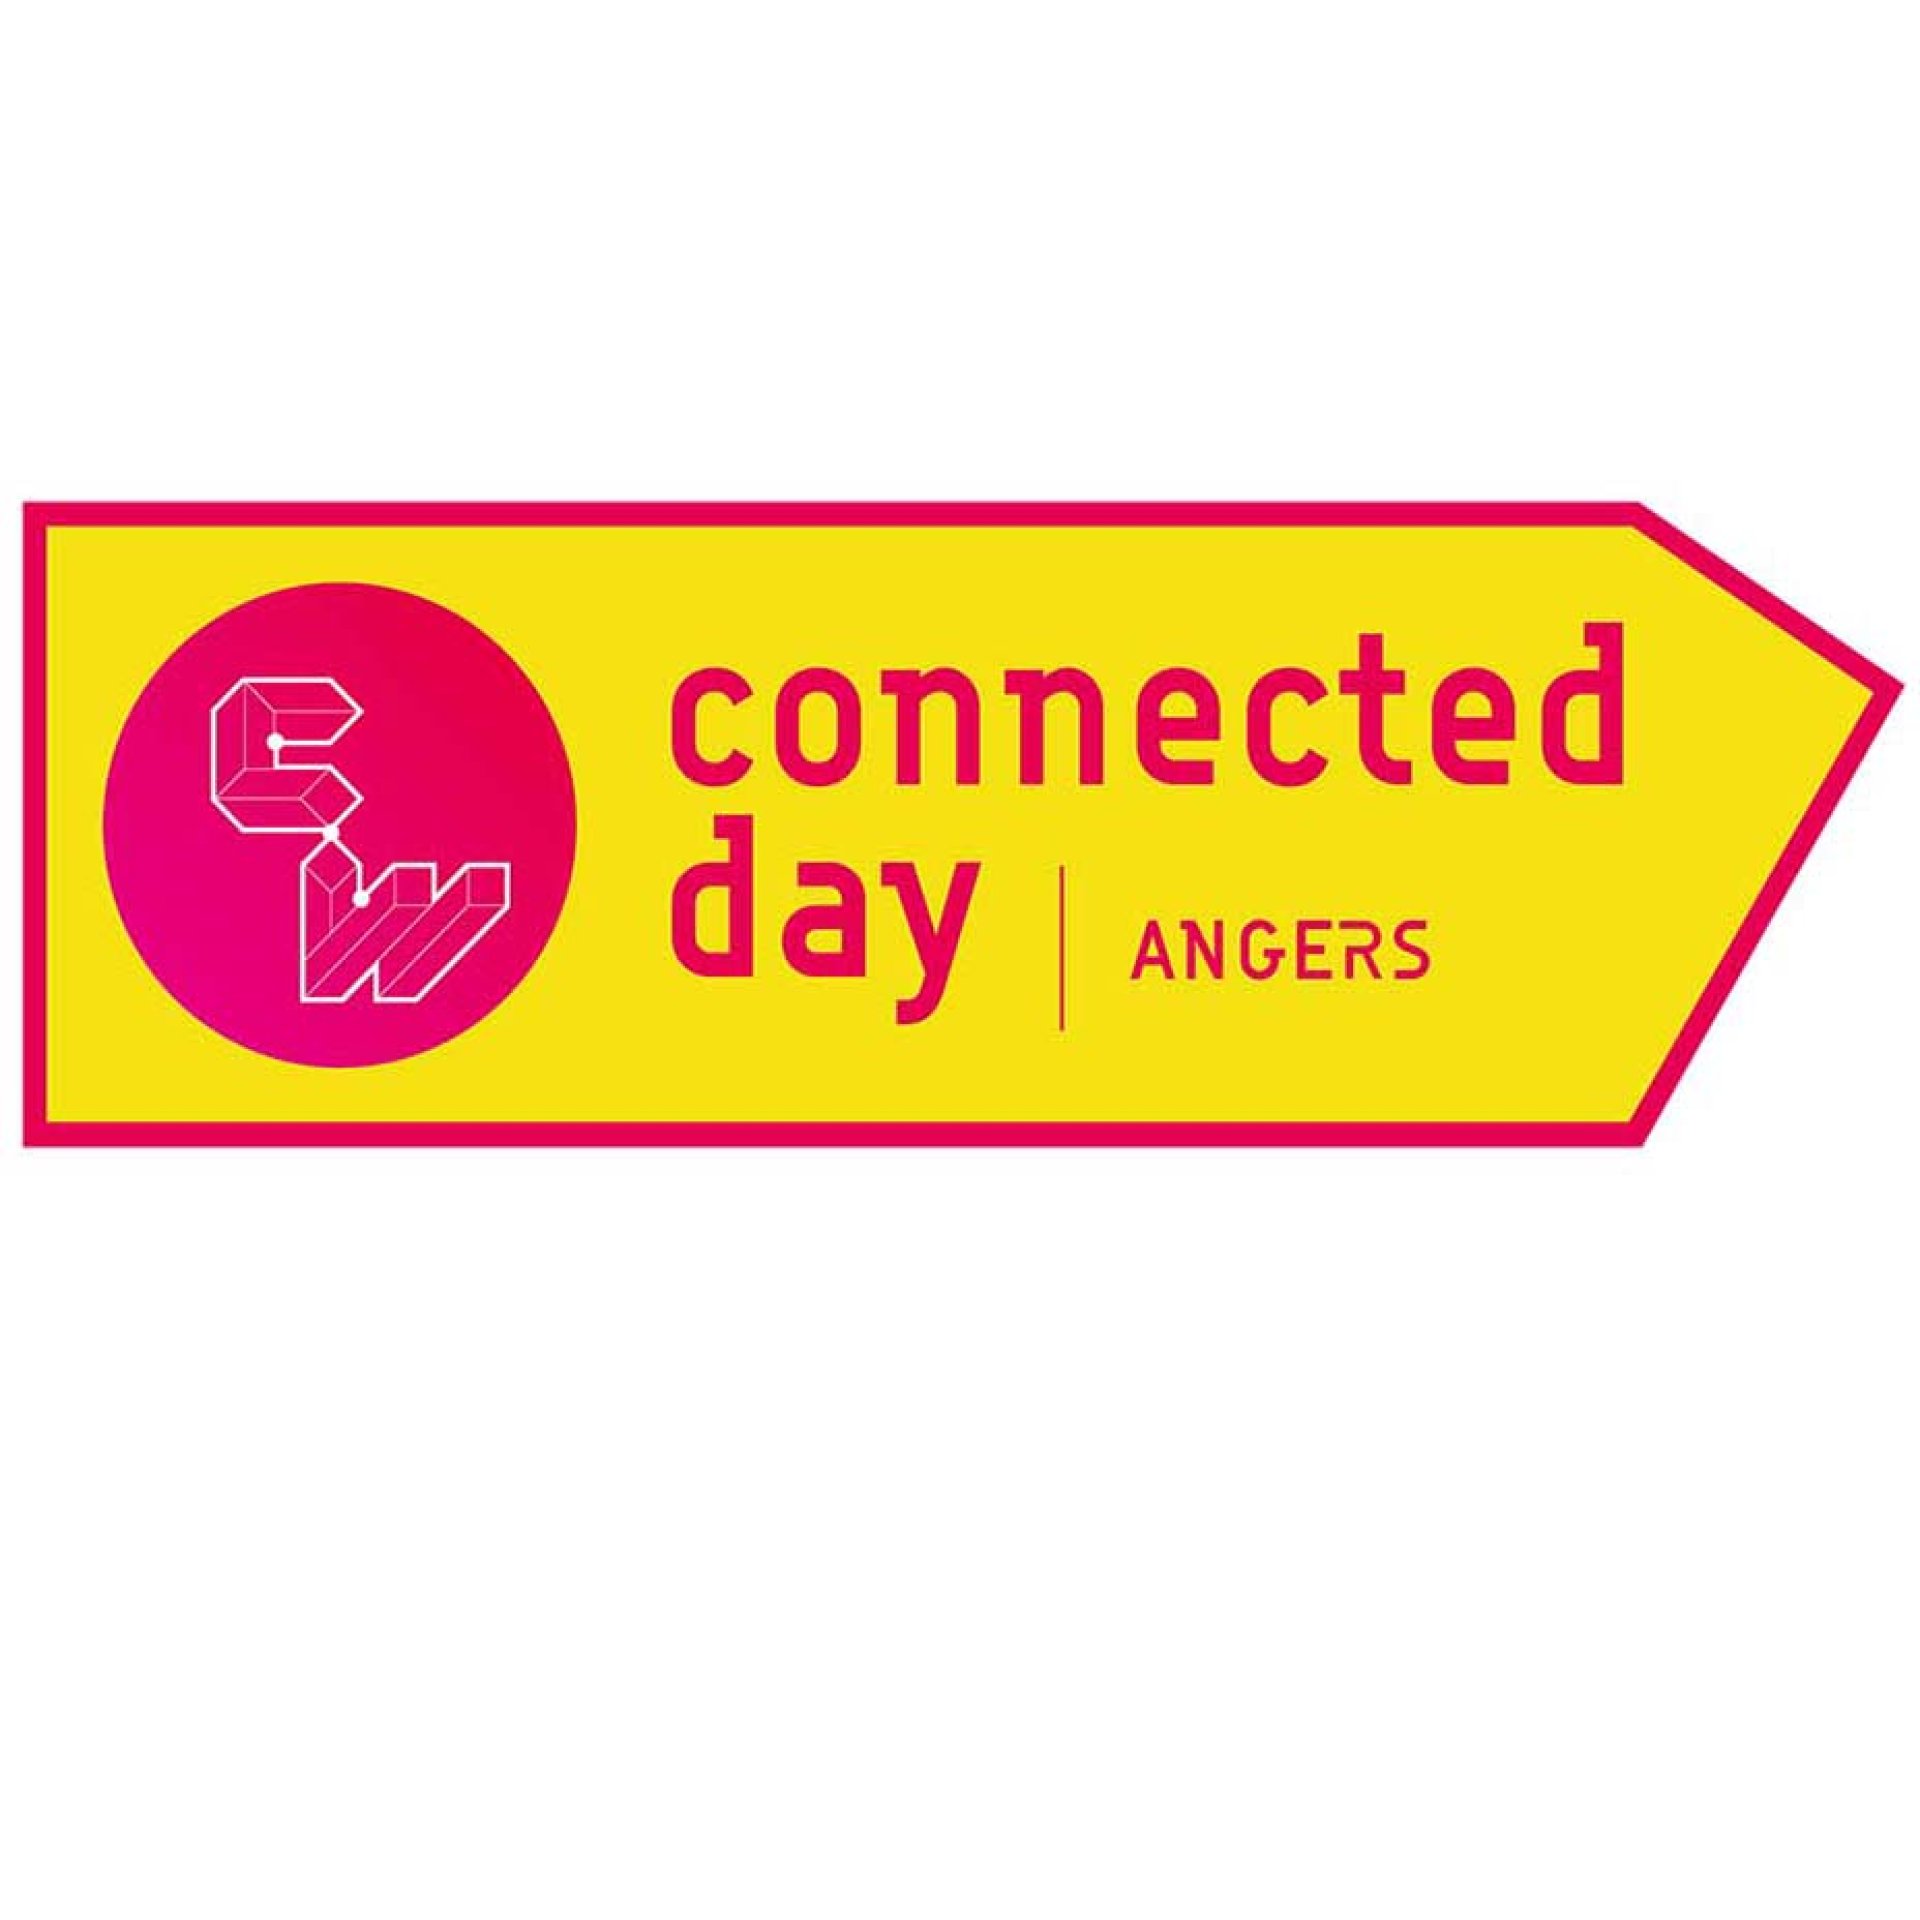 Connected day